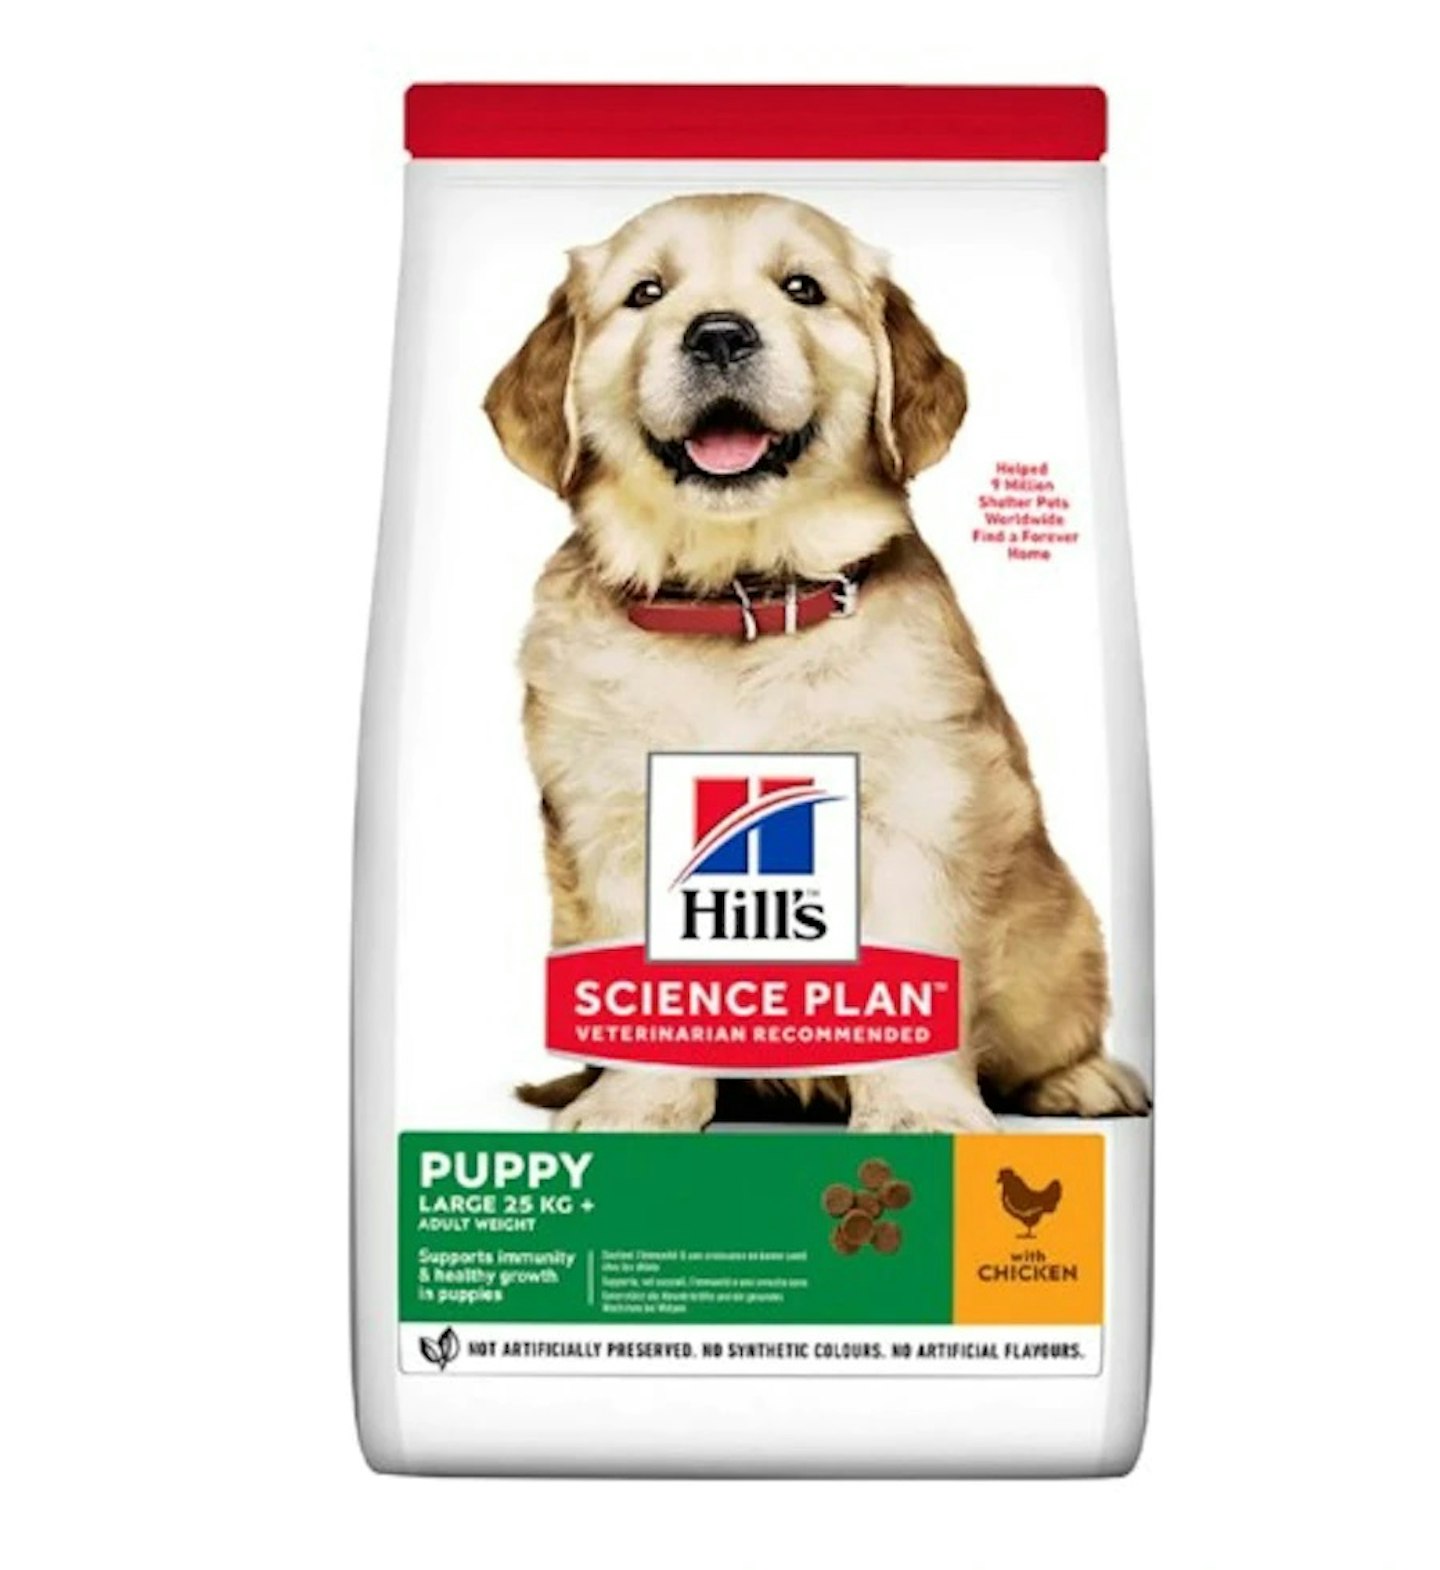 Hill's Science Plan Large Puppy Dry Dog Food